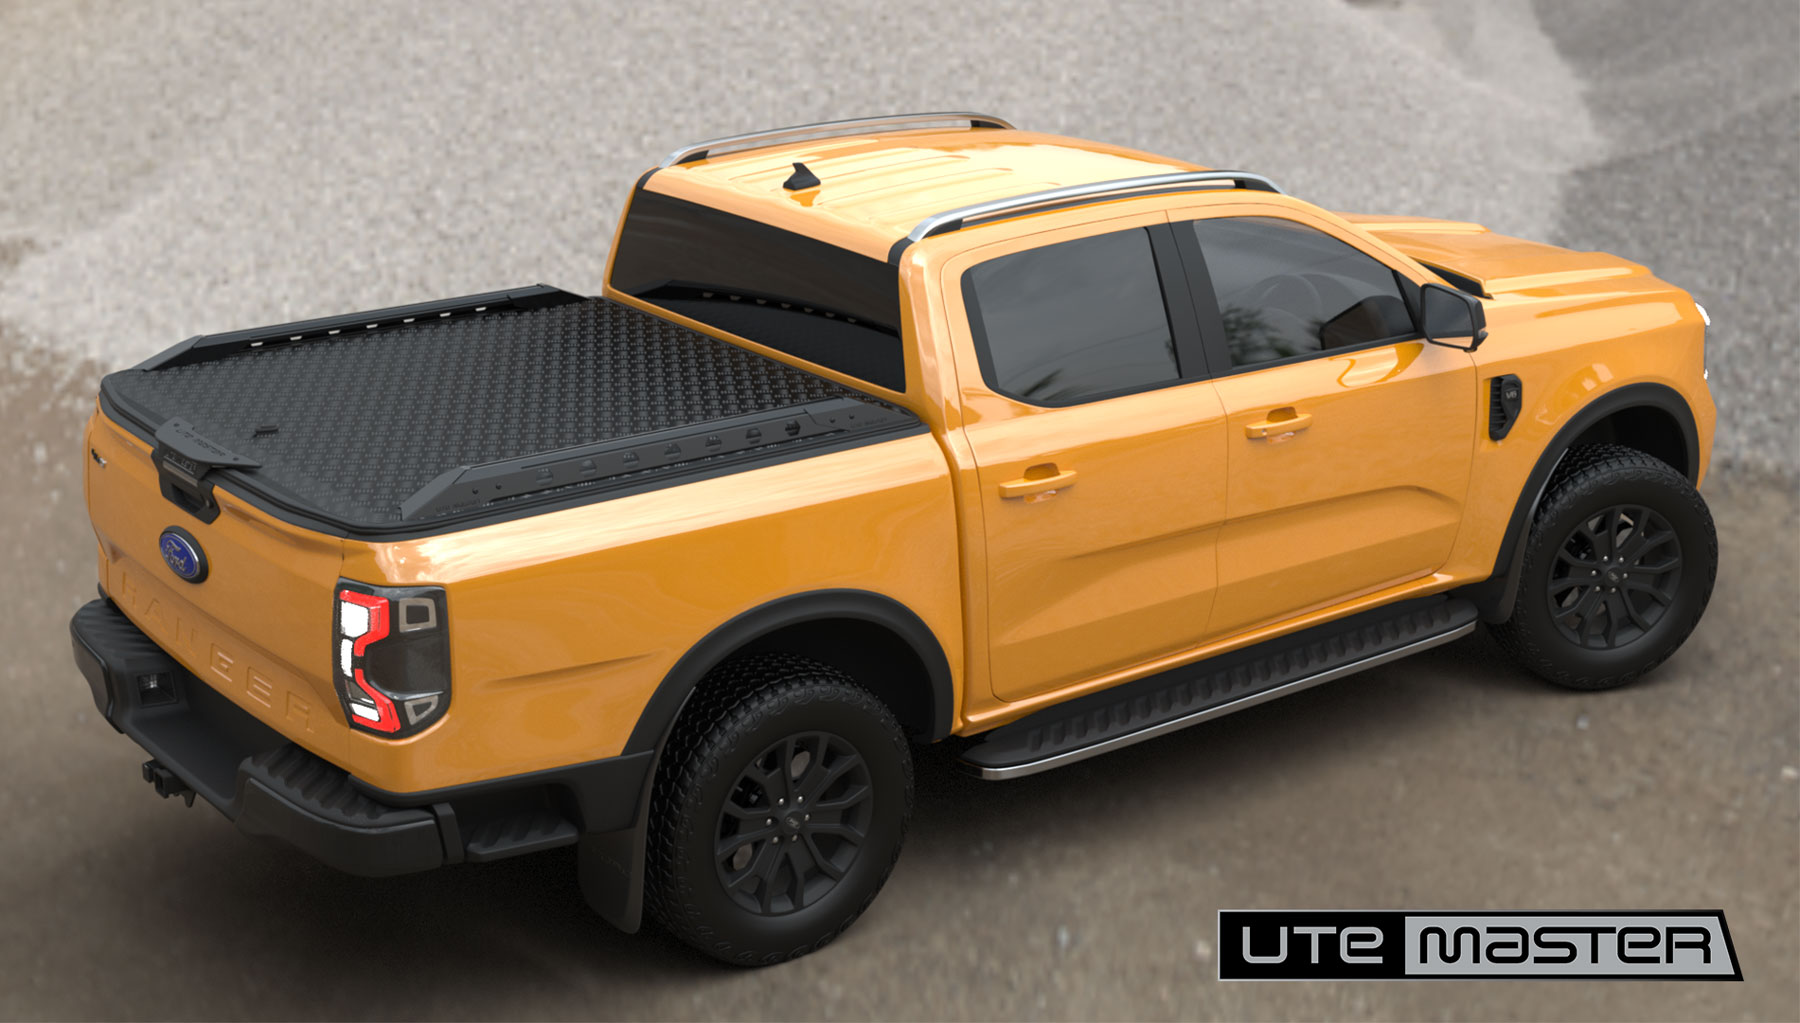 2022 Ford Ranger Accessories Utemaster Load Lid Ute Tub Hard Lid Cover